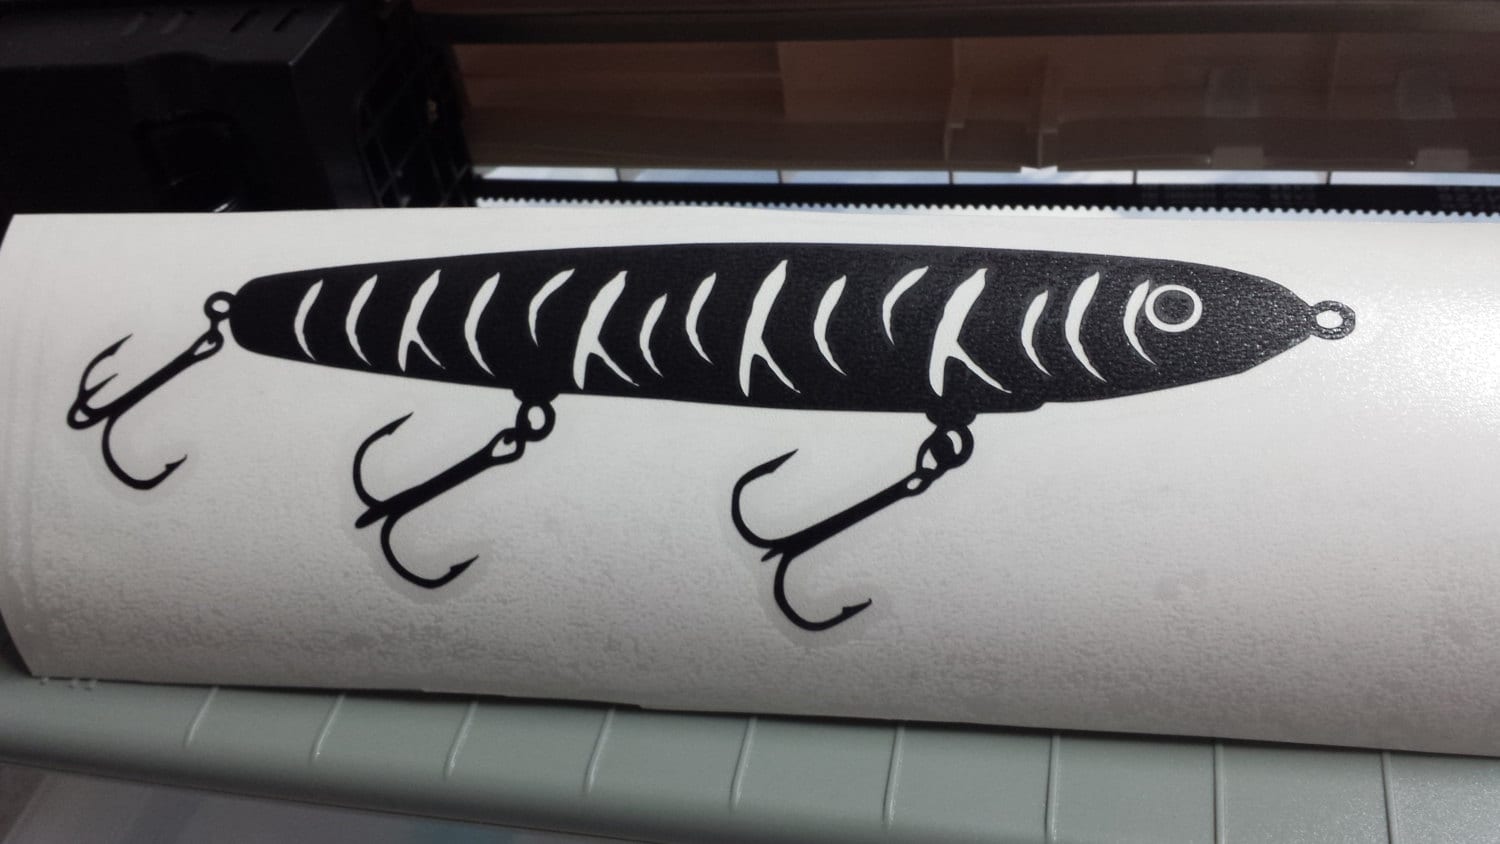 Download Fishing lure vinyl decal from RaysVinyls on Etsy Studio